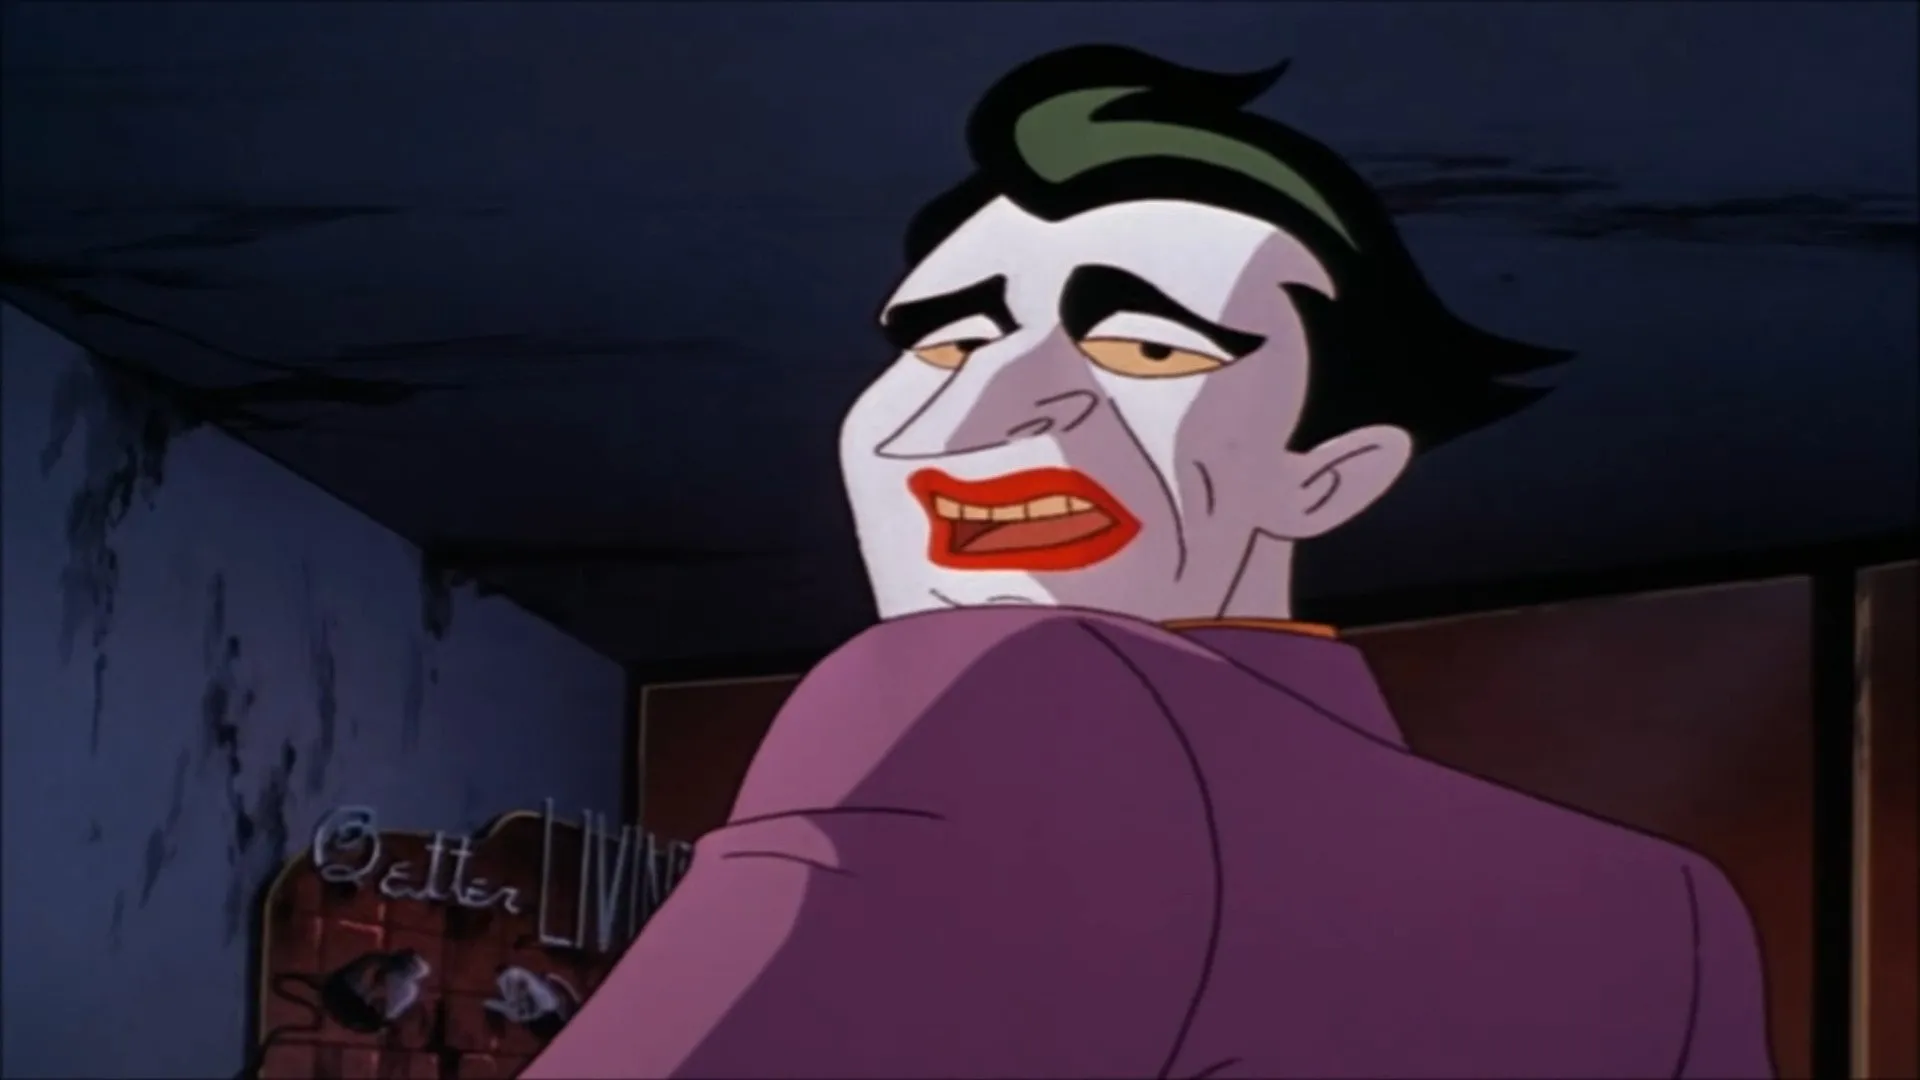 The Best Joker Origin Movie? Mask Of The Phantasm, Of Course. | The Mary Sue